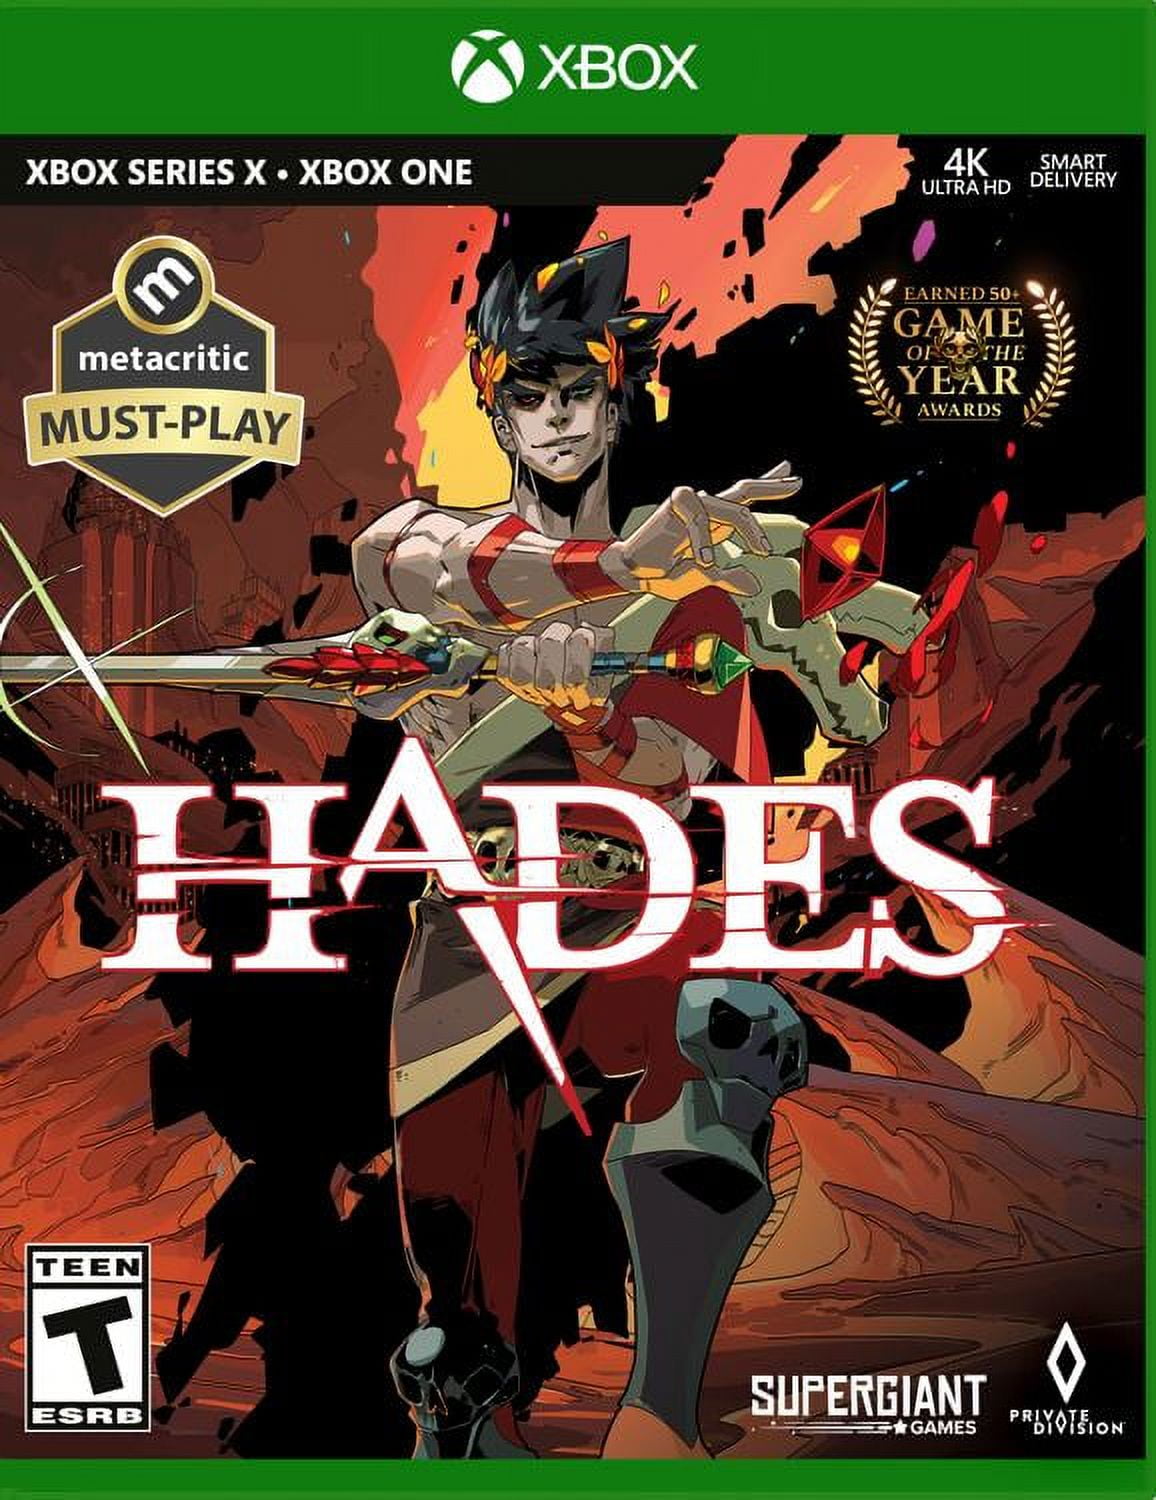 Hades ( Physical Copy ) PlayStation 4 - PS4 - BRAND NEW Supergiant Games